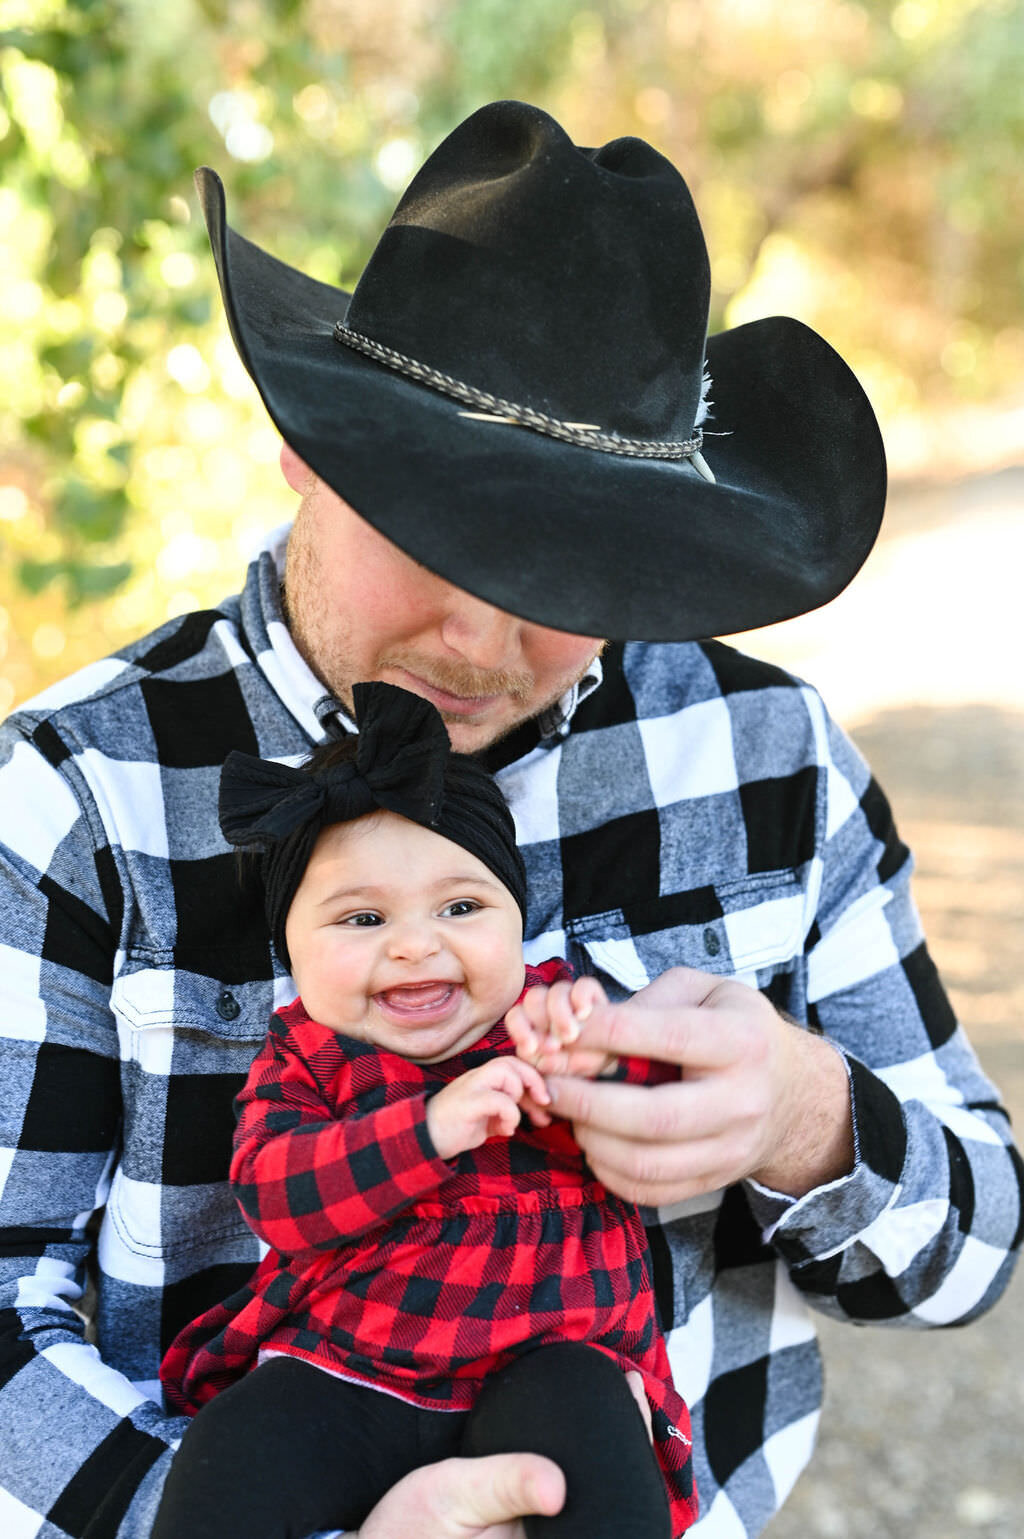 A dad in a cowboy hat holding a baby as she smiles.